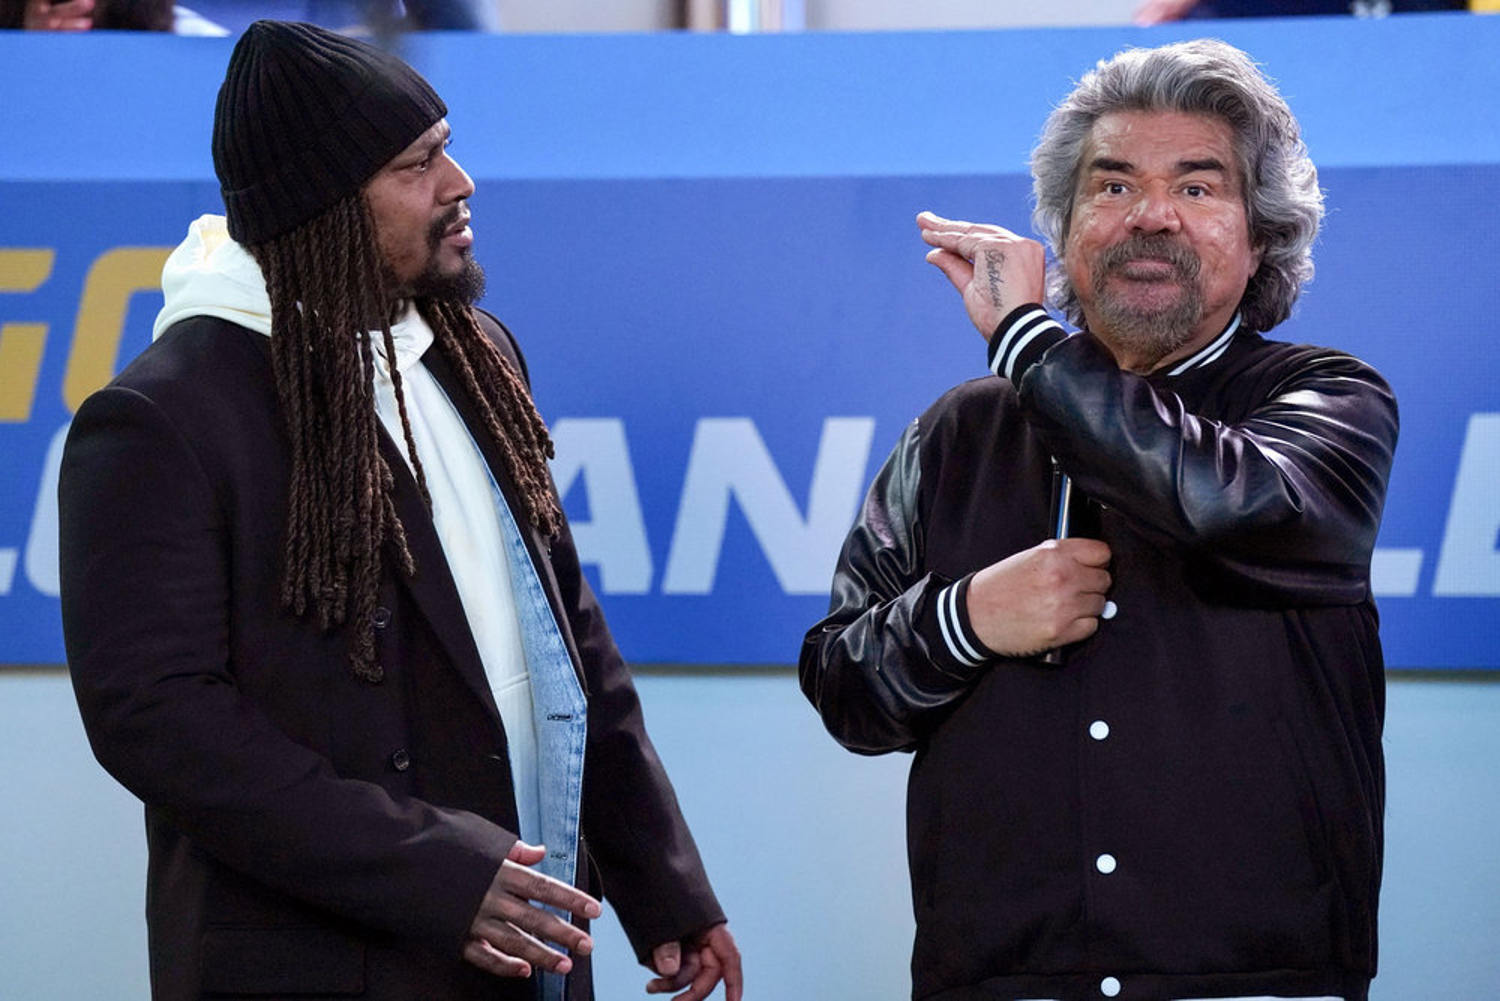 George Lopez and daughter Mayan put the 'fun in dysfunction' in 'Lopez vs. Lopez' season 2 episodes